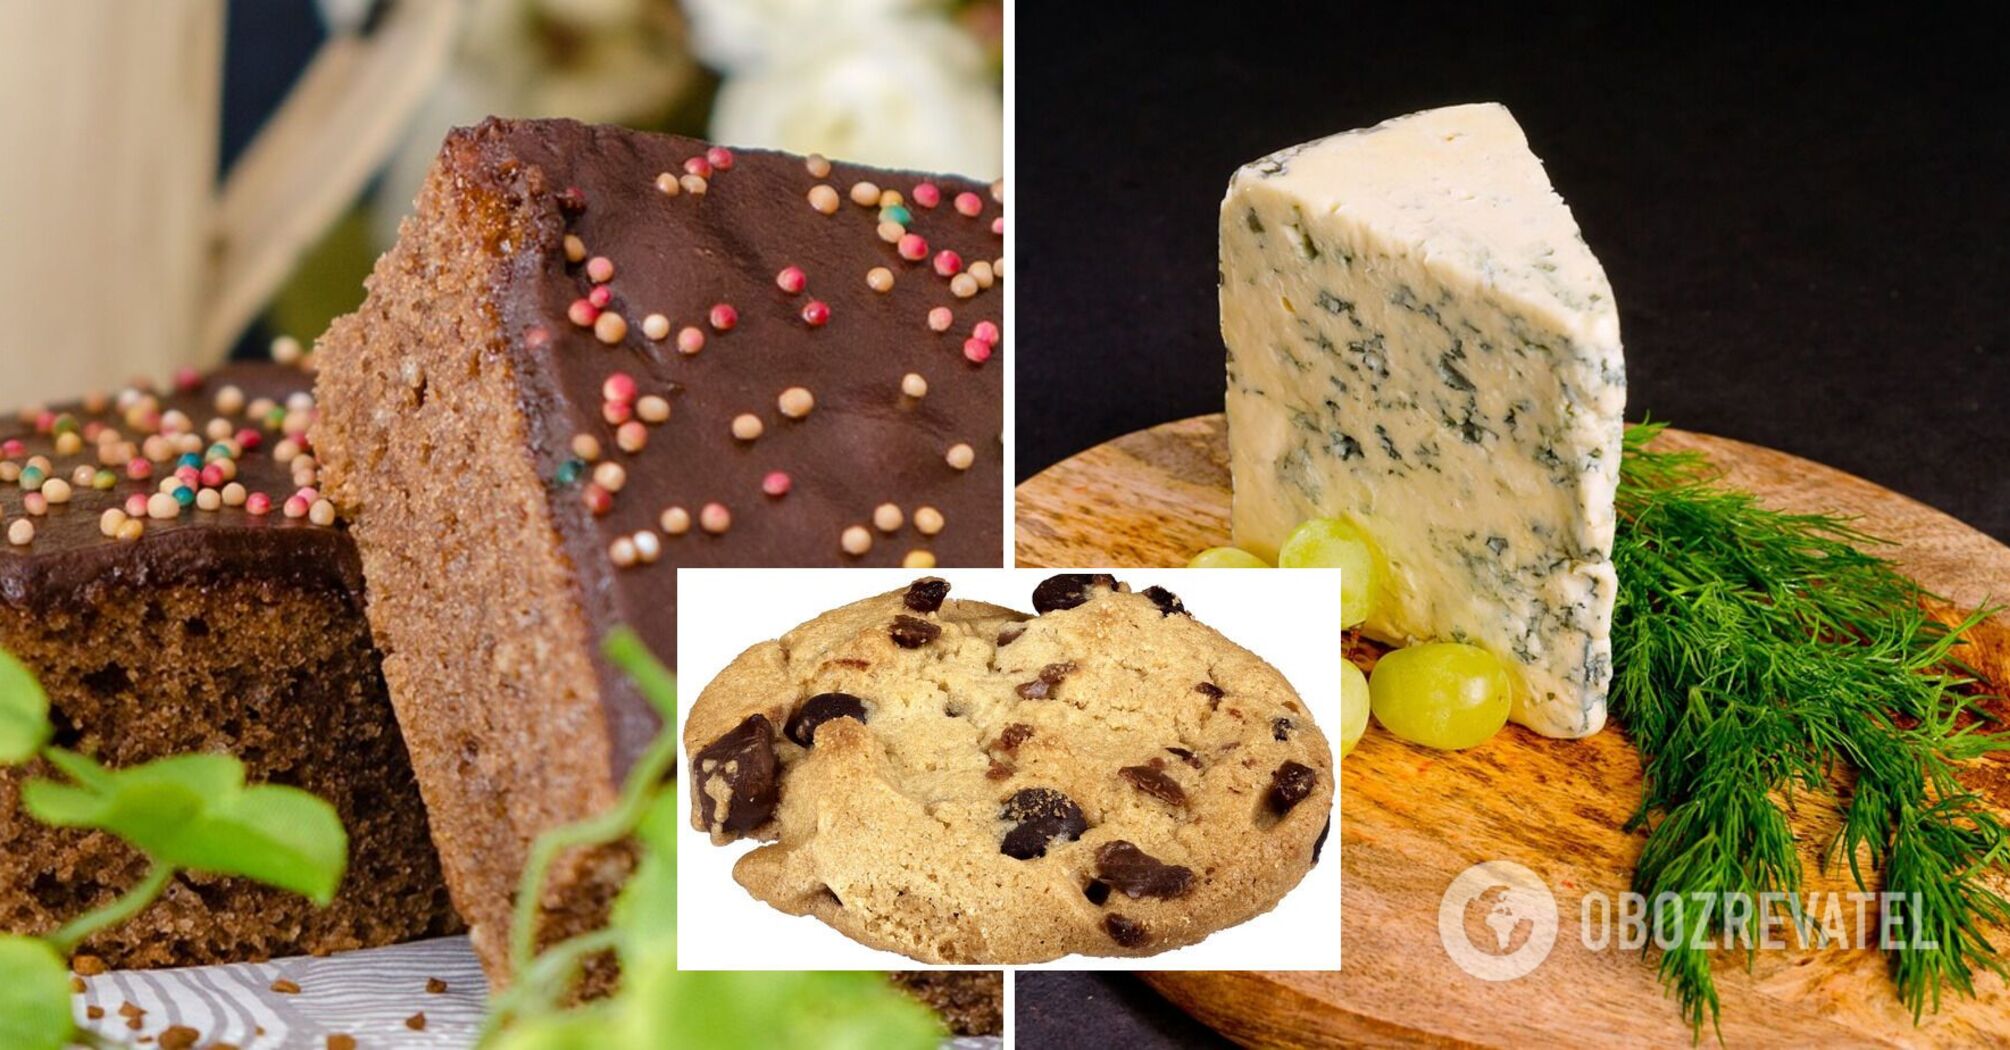 3 most popular dishes that were created by accident